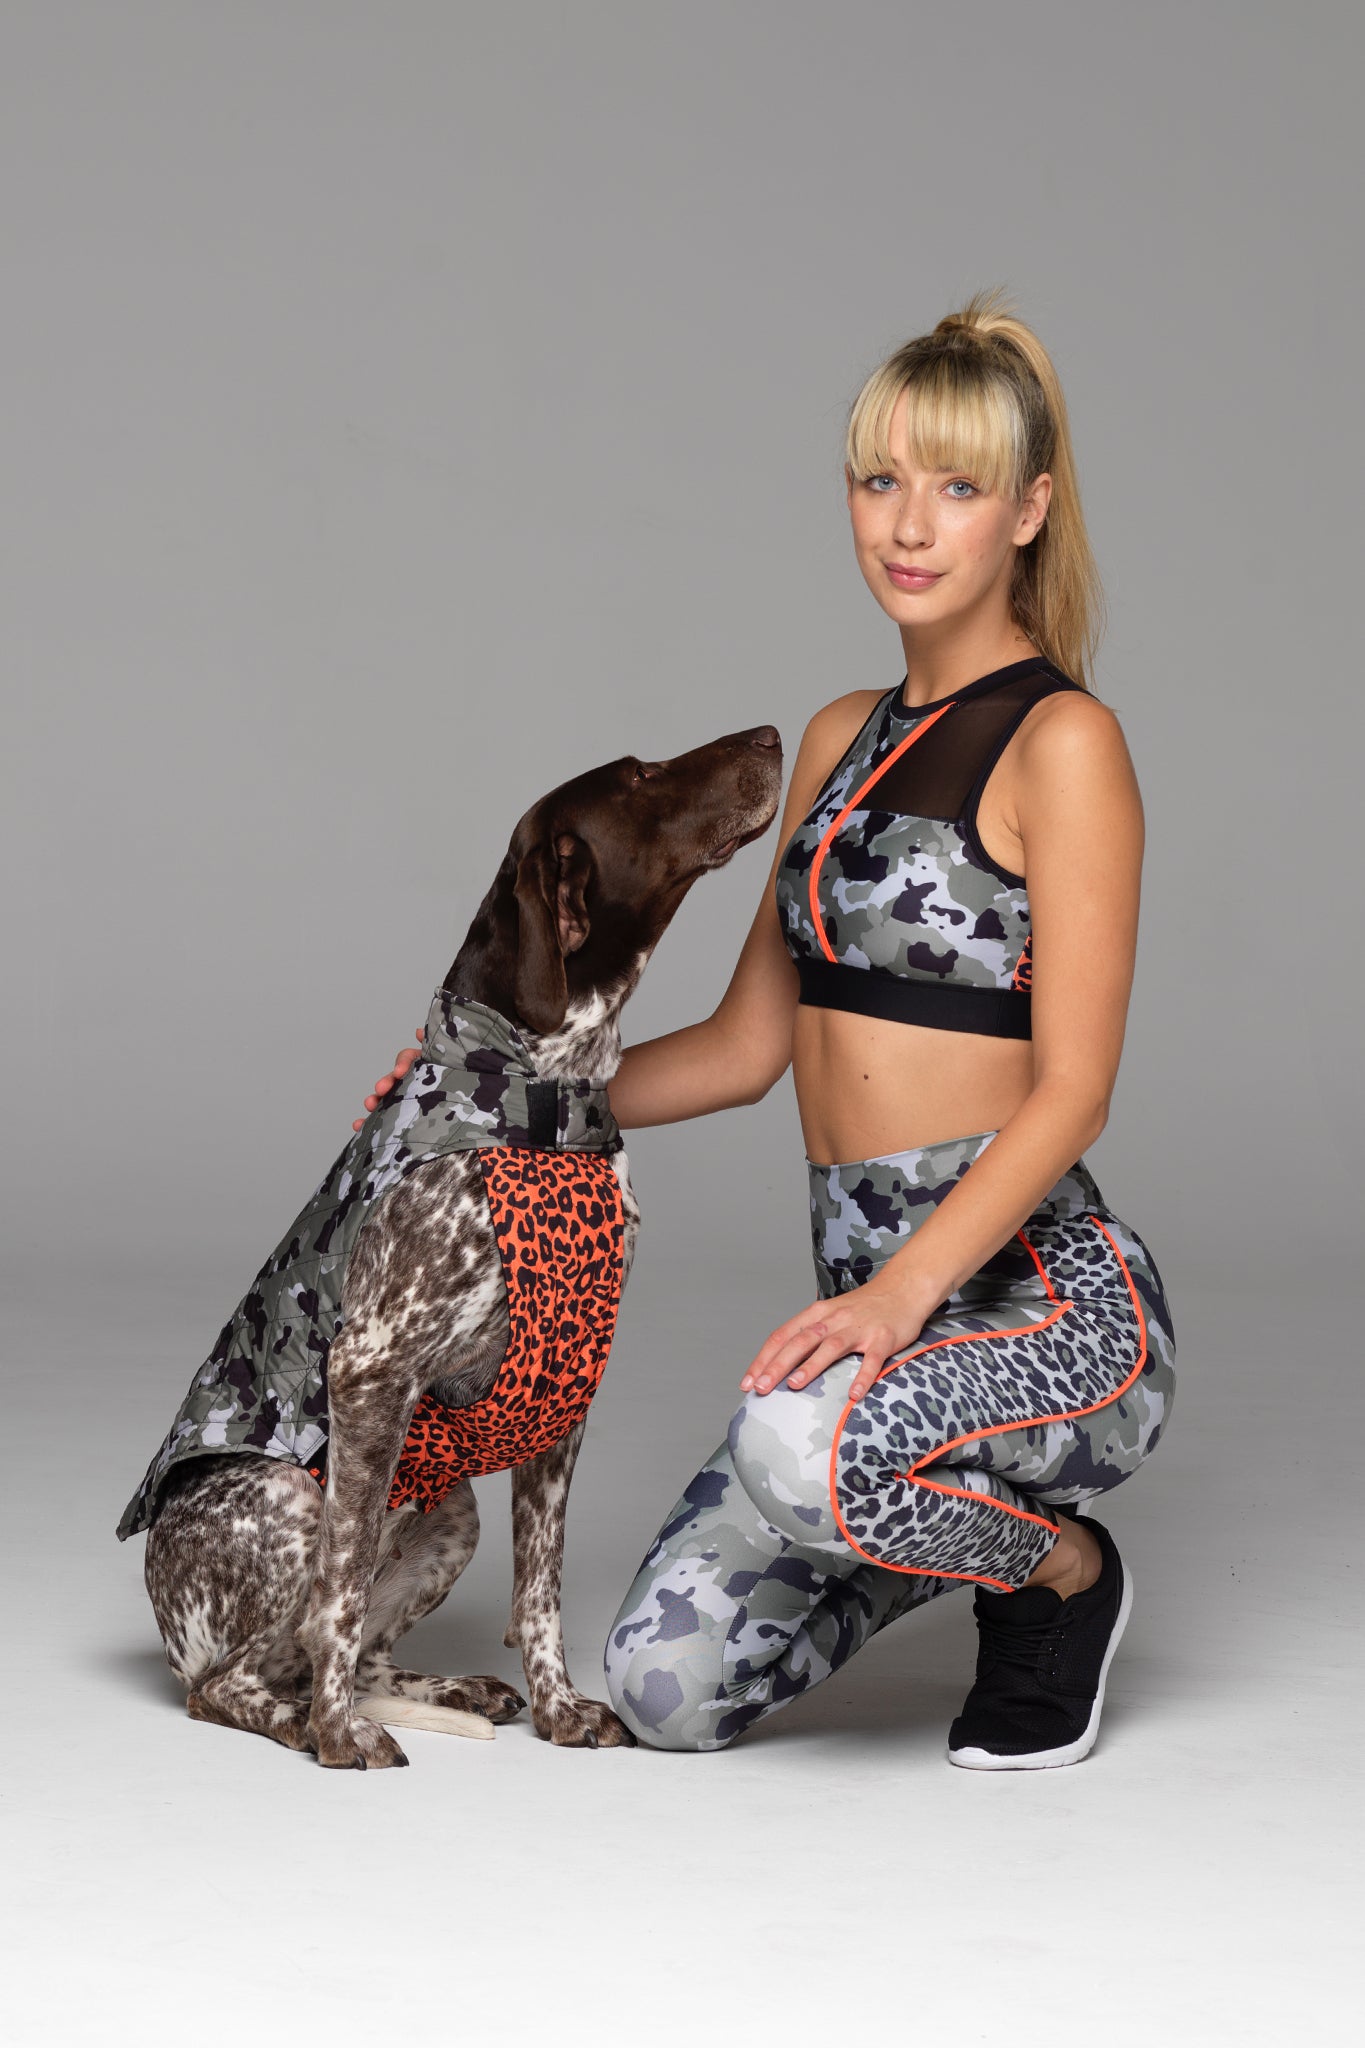 Time for Matchy-Matchy! Foxtrot Dog Jacket worn by dog model and matching Tour of Duty sports bra and Charlie 7/8 legging worn by human model.